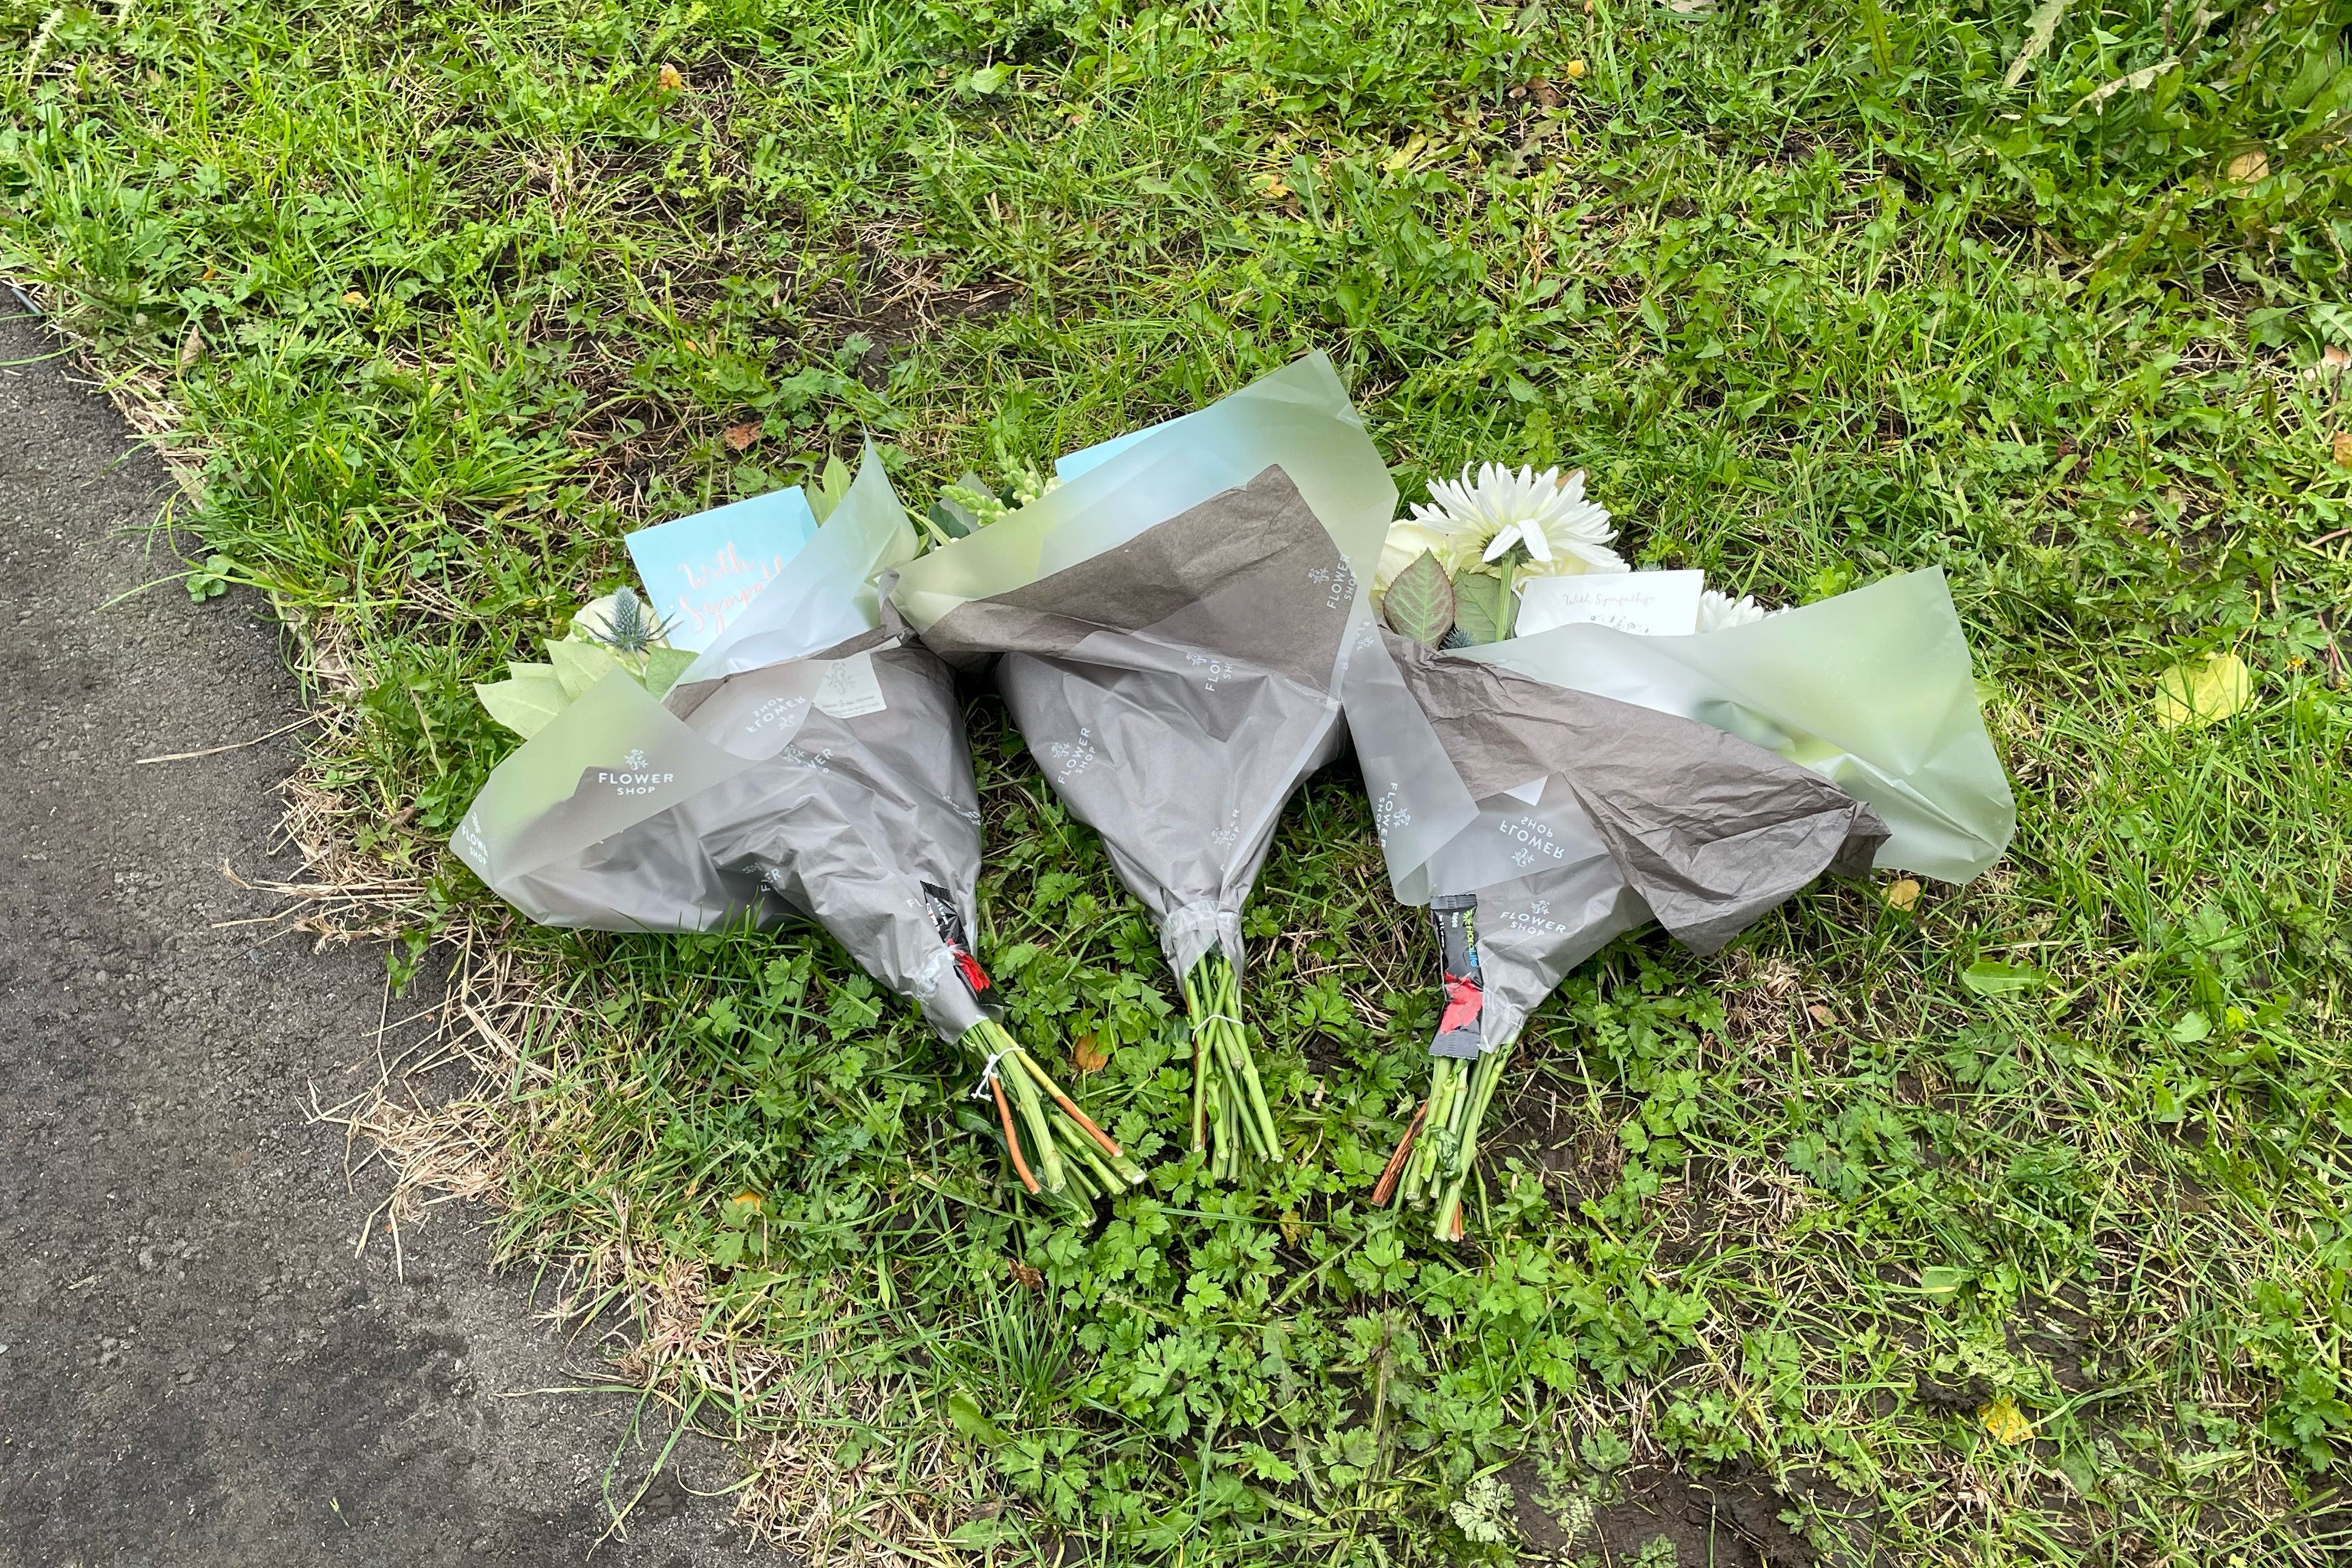 Floral tributes left on behalf of a school for three children killed in a house fire in Channel Close, Hounslow (George Lithgow/PA)